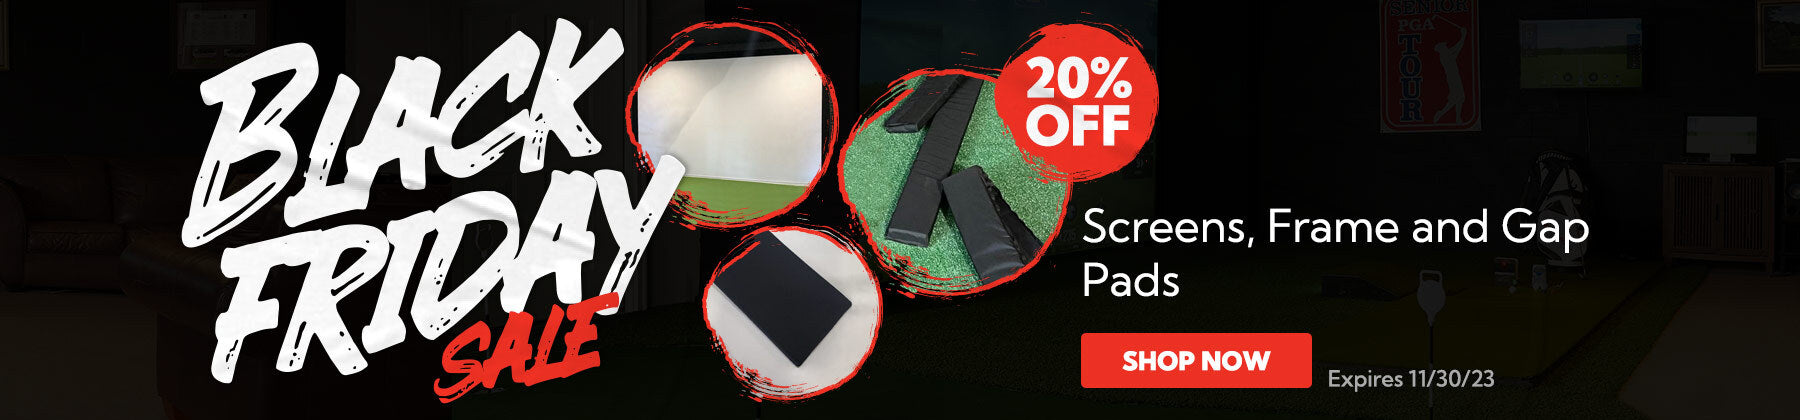 Save 20% on Screens, Frame and Gap Pads